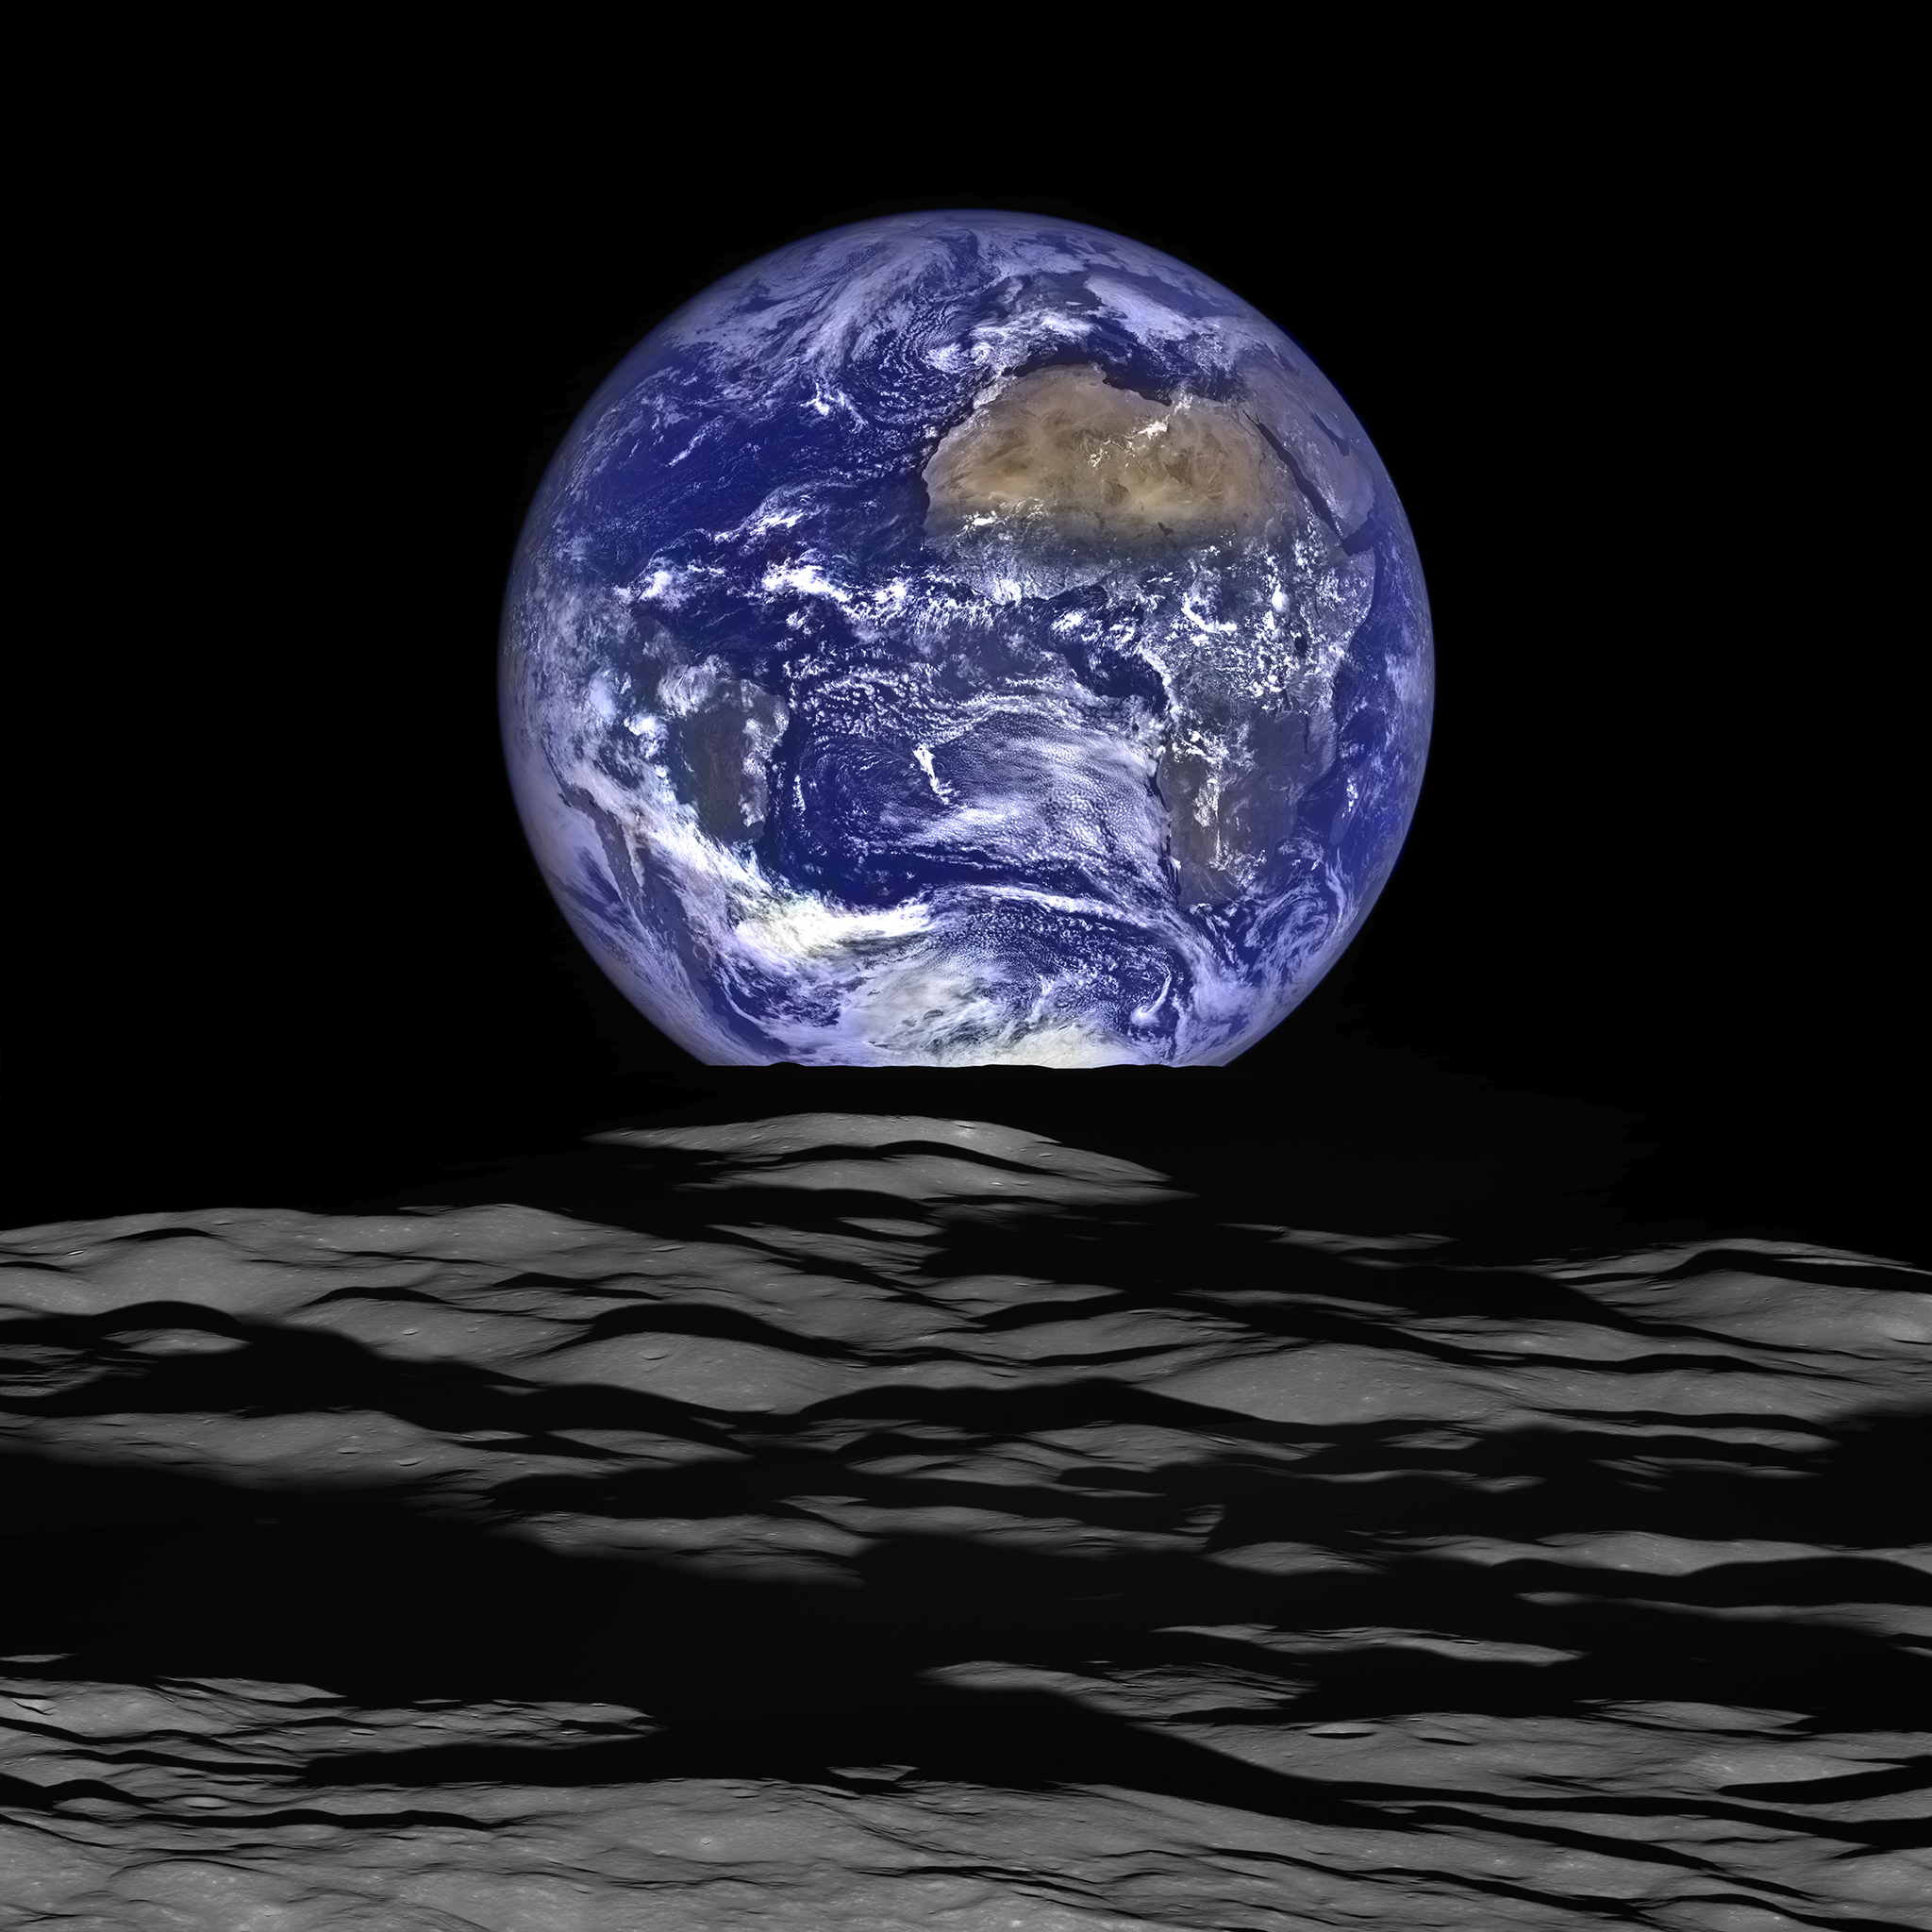 NASA image of the Earth from the Lunar Reconnaissance Orbiter